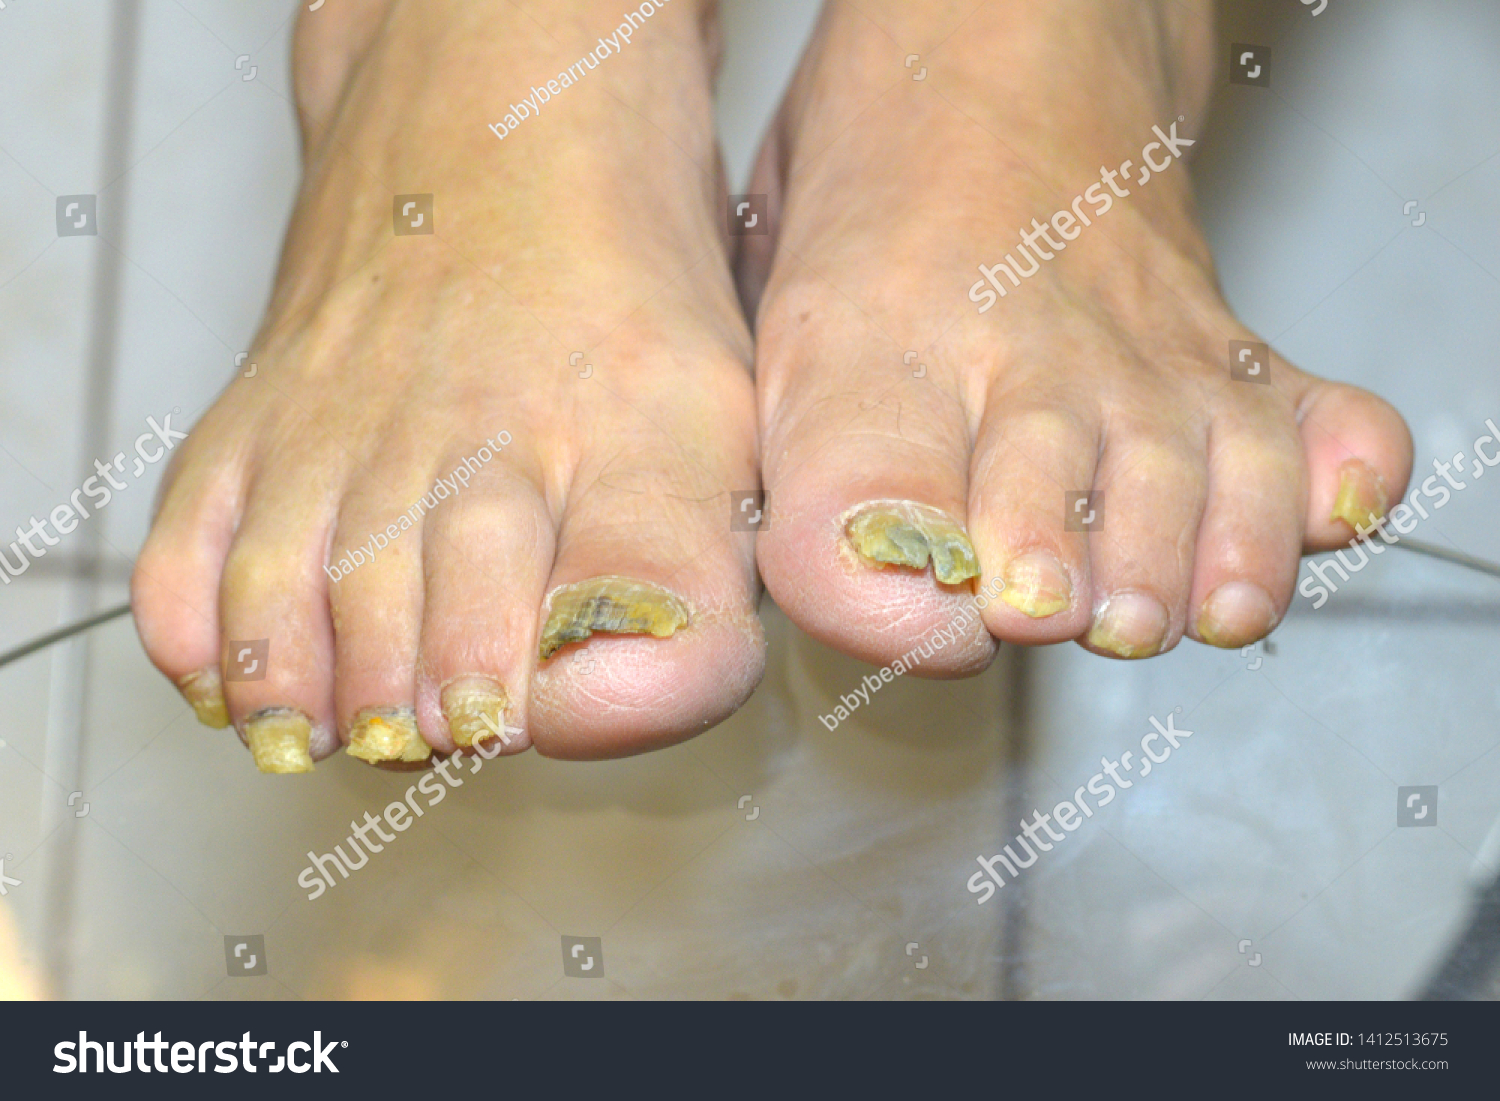 cracked toes fungus